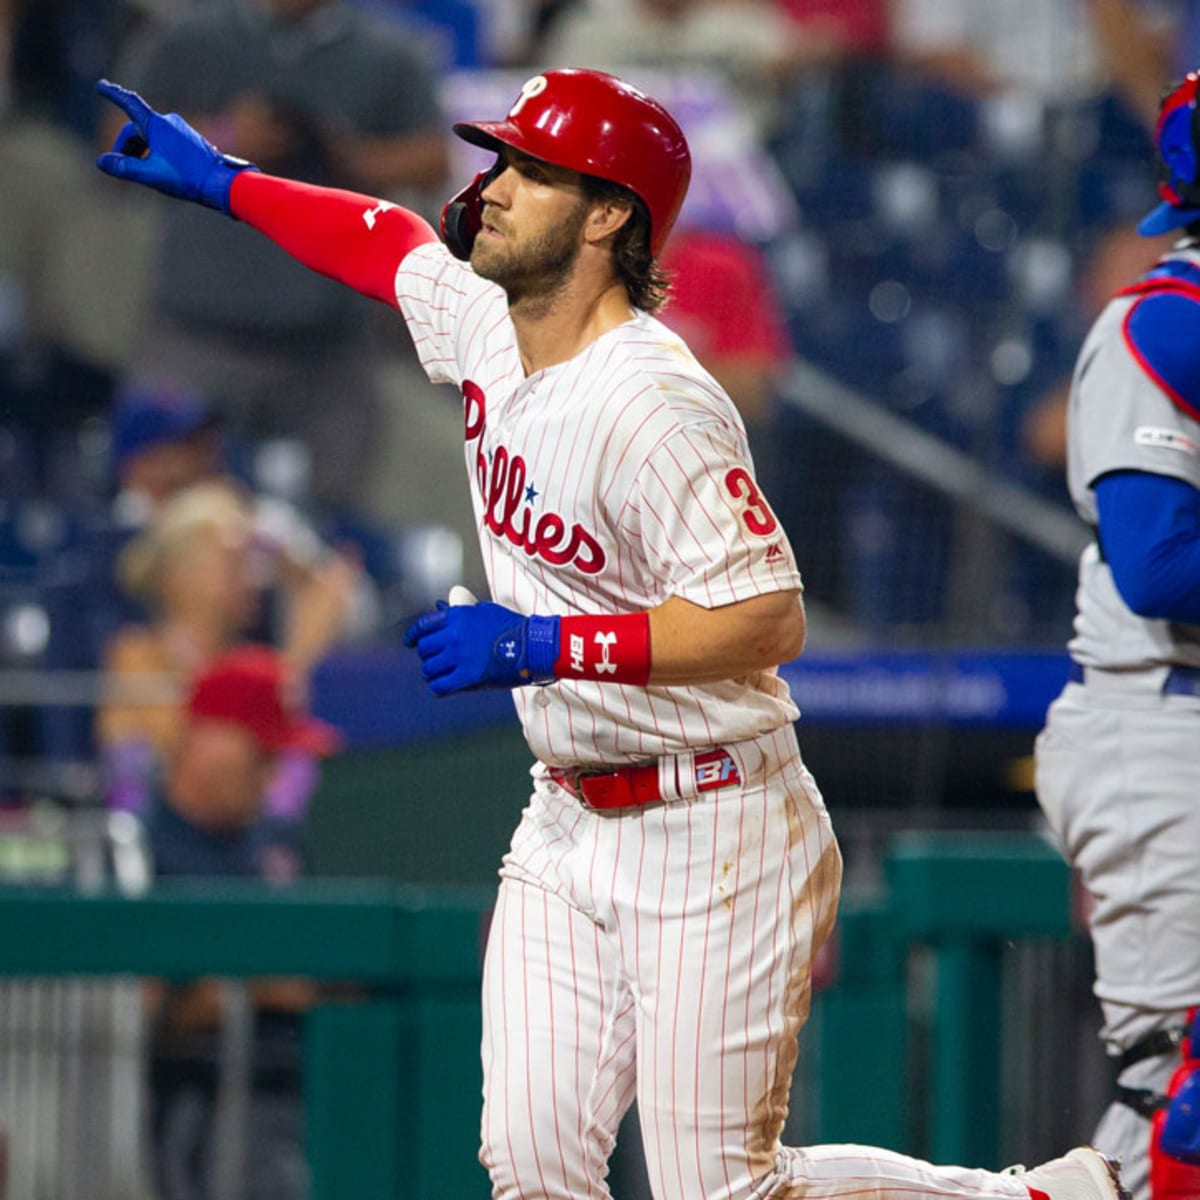 Bryce Harper walk-off grand slam gives Phillies win over Cubs